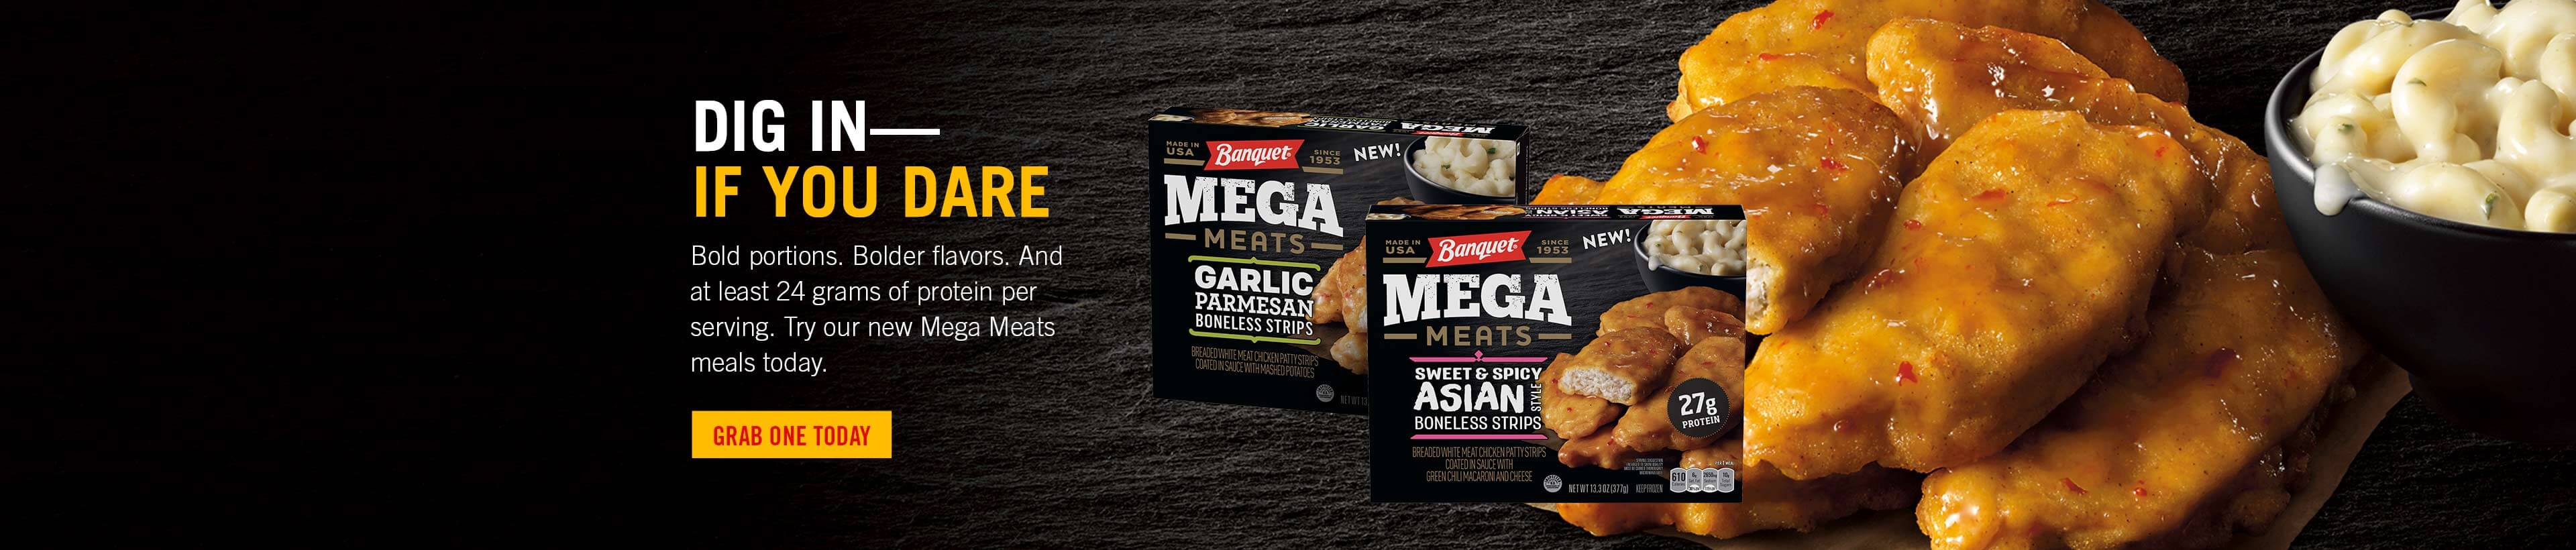 DIG IN—IF YOU DARE. Bold portions. Bolder flavors. And at least 24 grams of protein per serving. Try our new Mega Meats meals today. Grab one today.